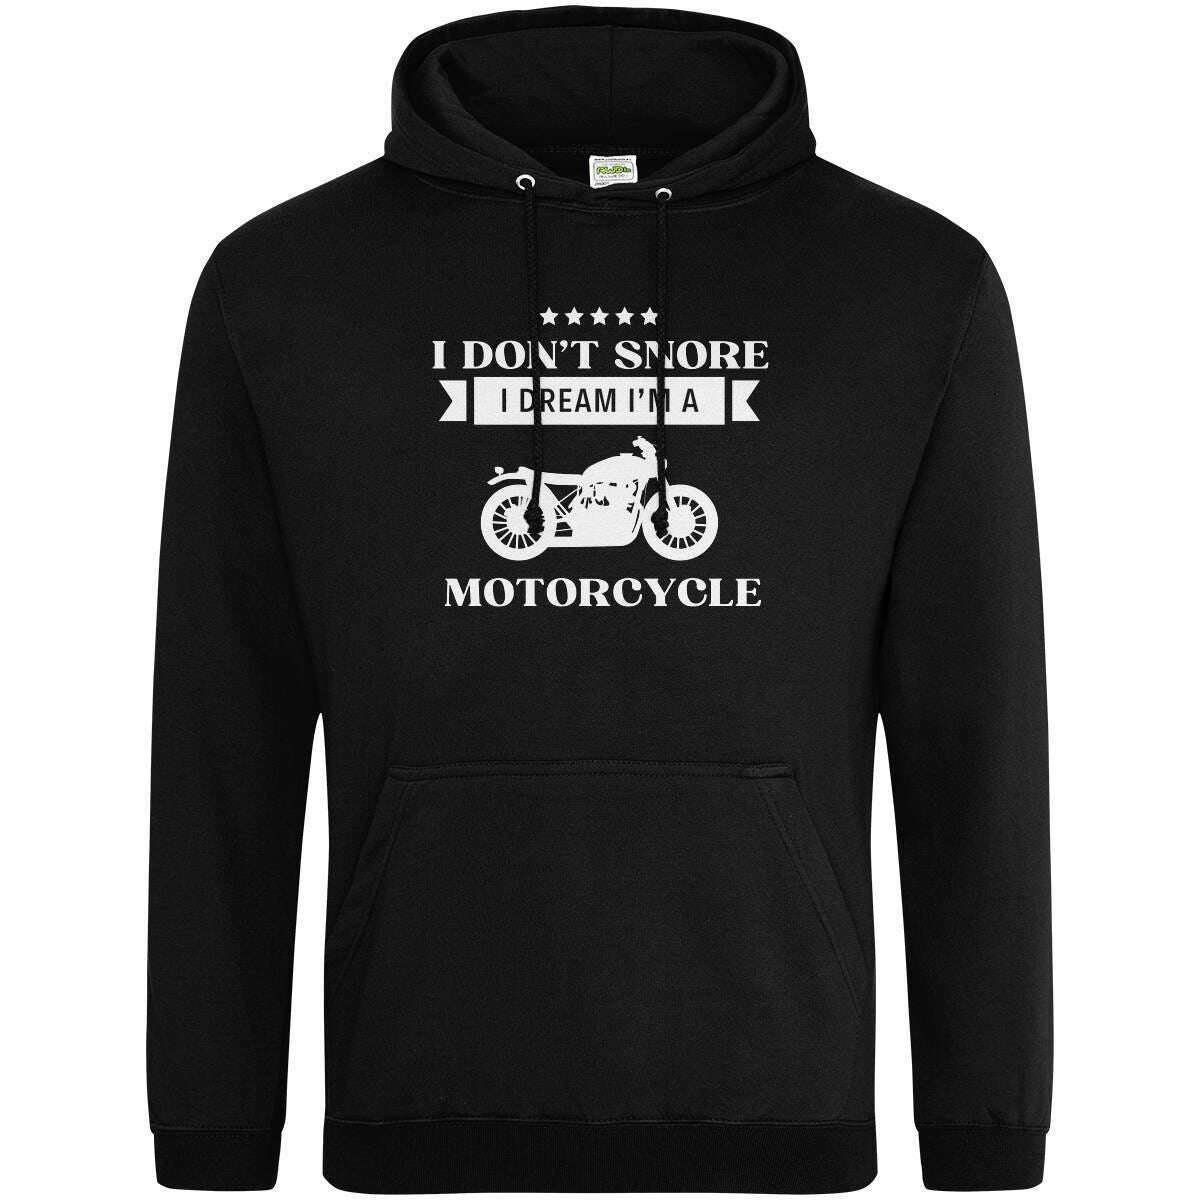 Teemarkable! I Don’t Snore I Dream I’m A Motorcycle Hoodie